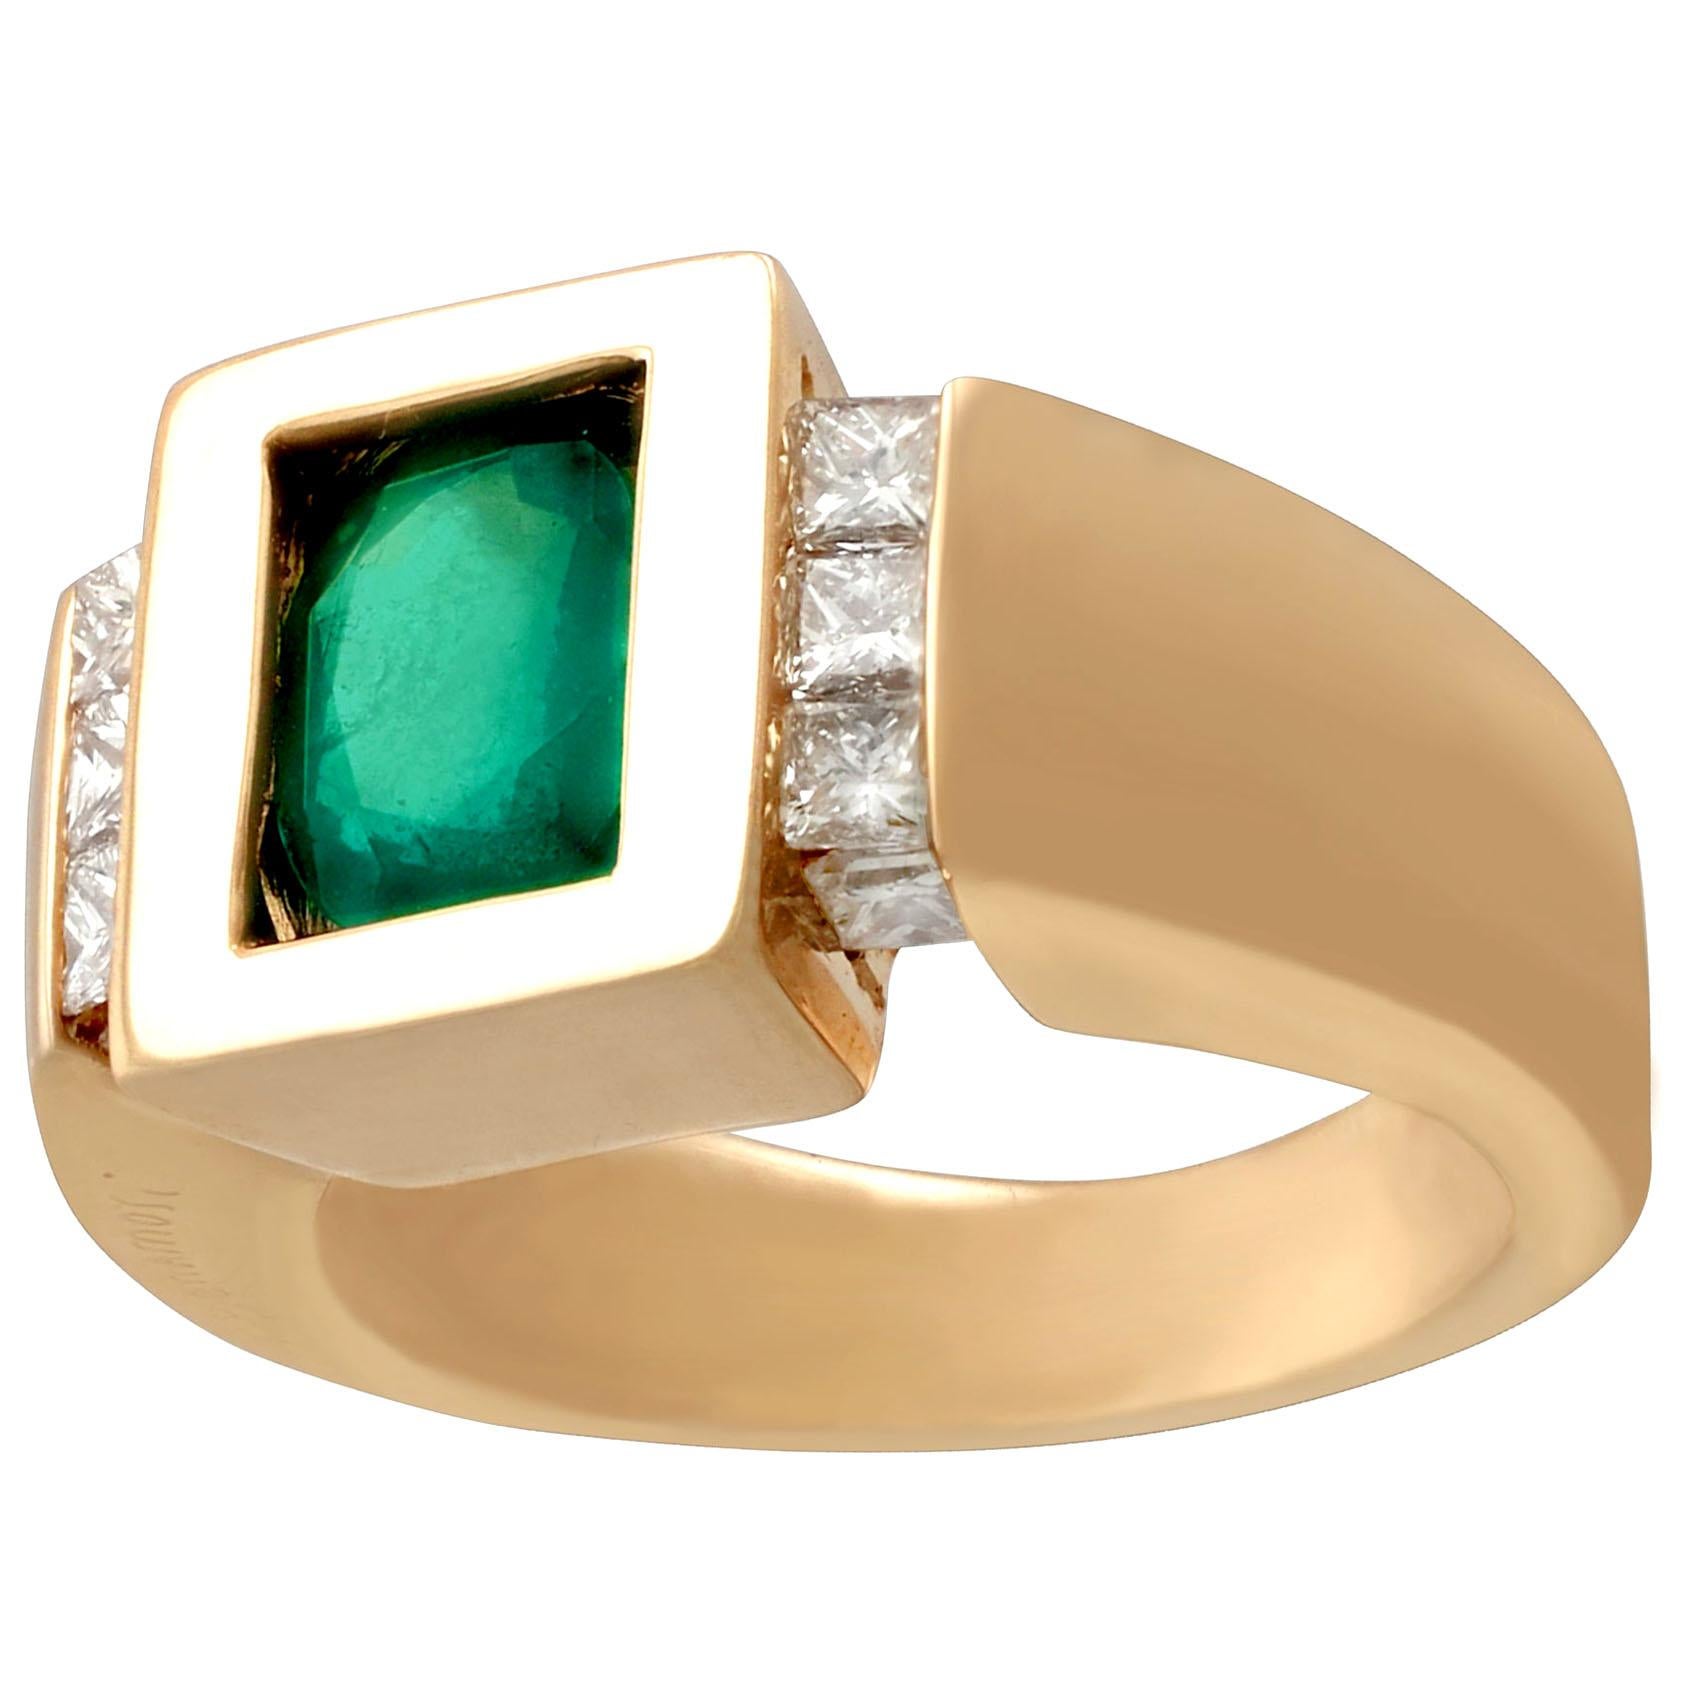 French 1.29 Carat Emerald and Diamond Yellow Gold Ring